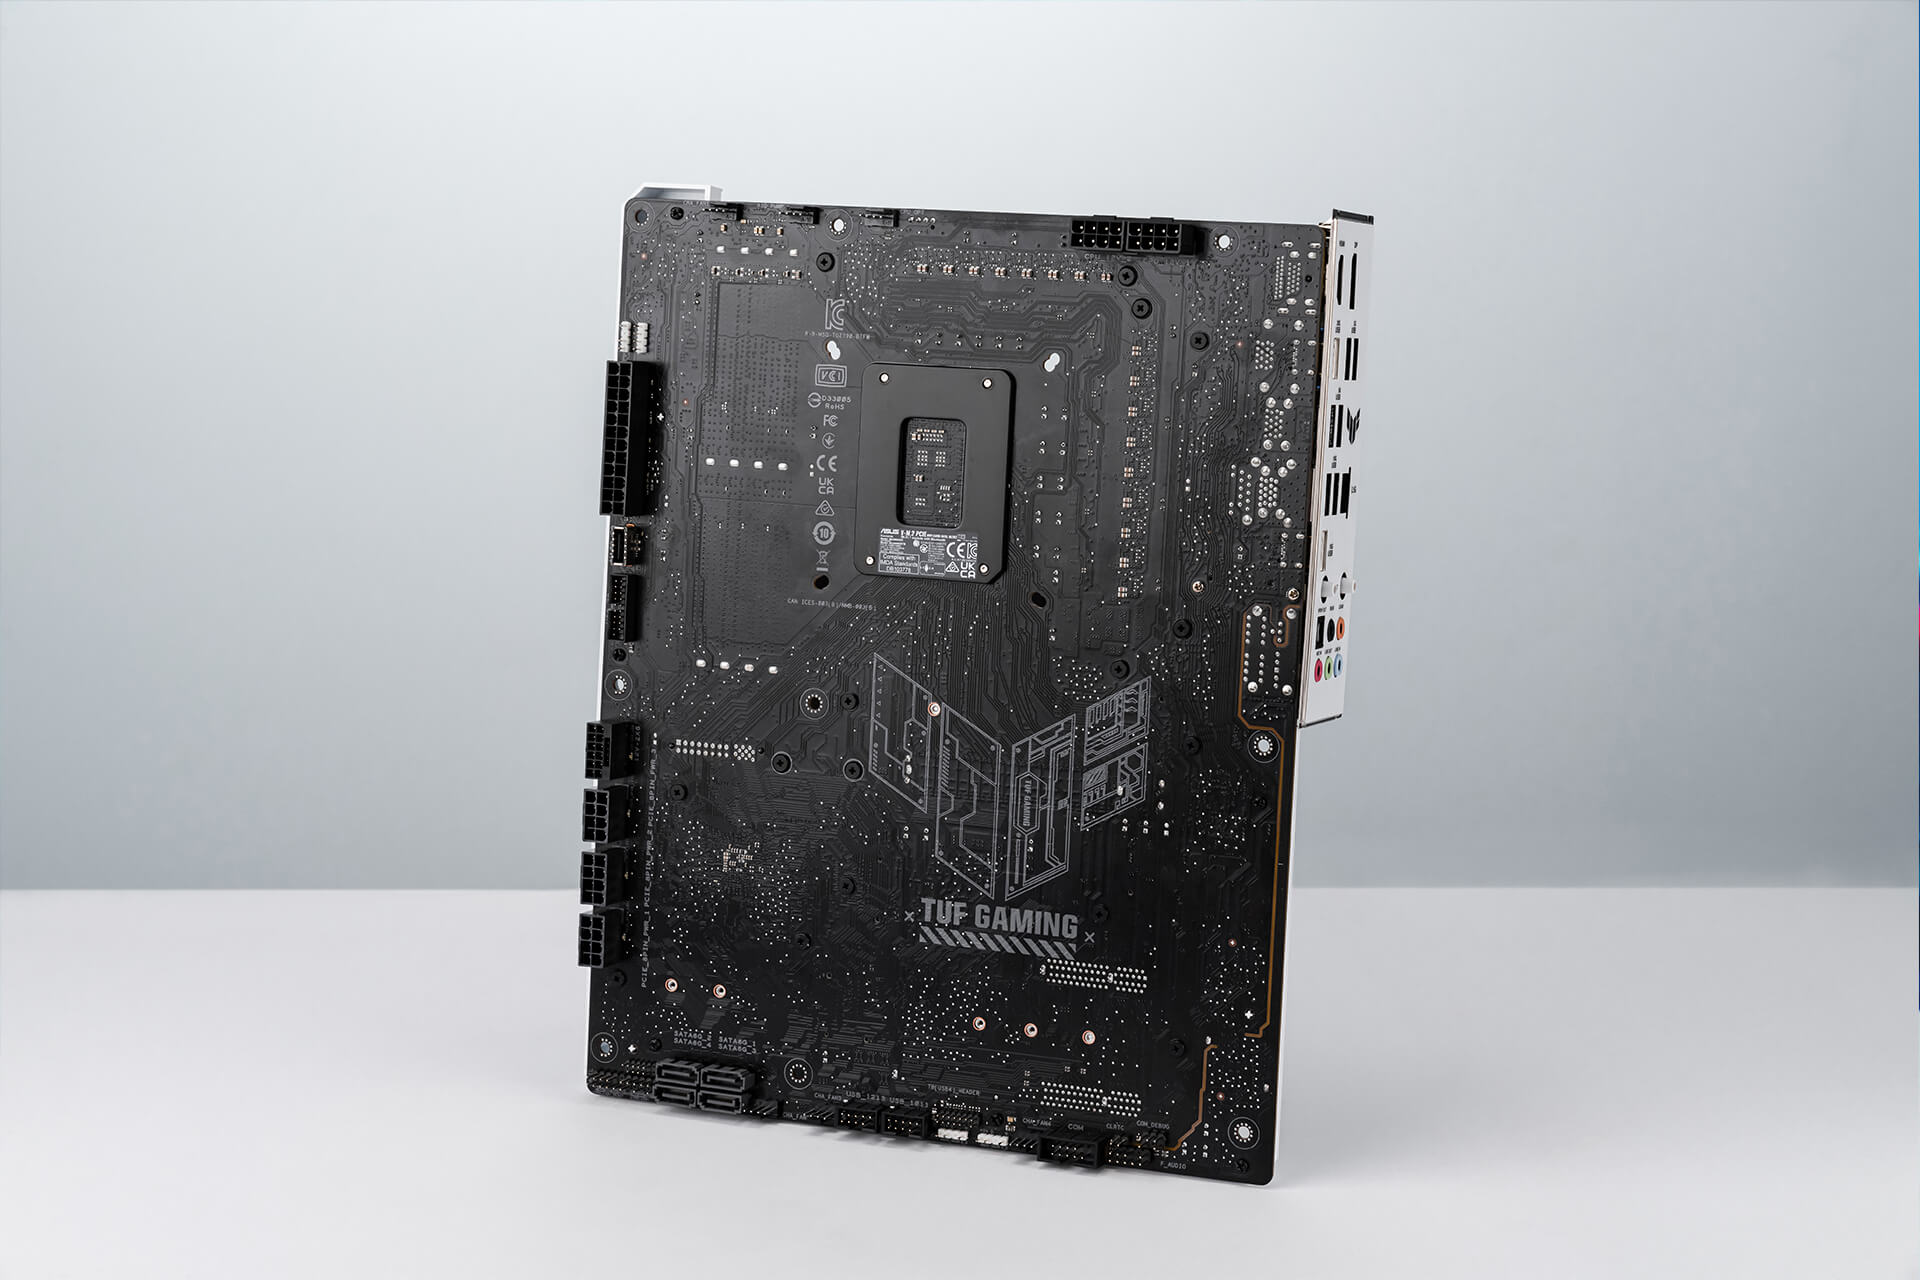 TUF GAMING Z790-BTF WIFI motherboard backside shows the hidden connector design that standing in the middle with white background.